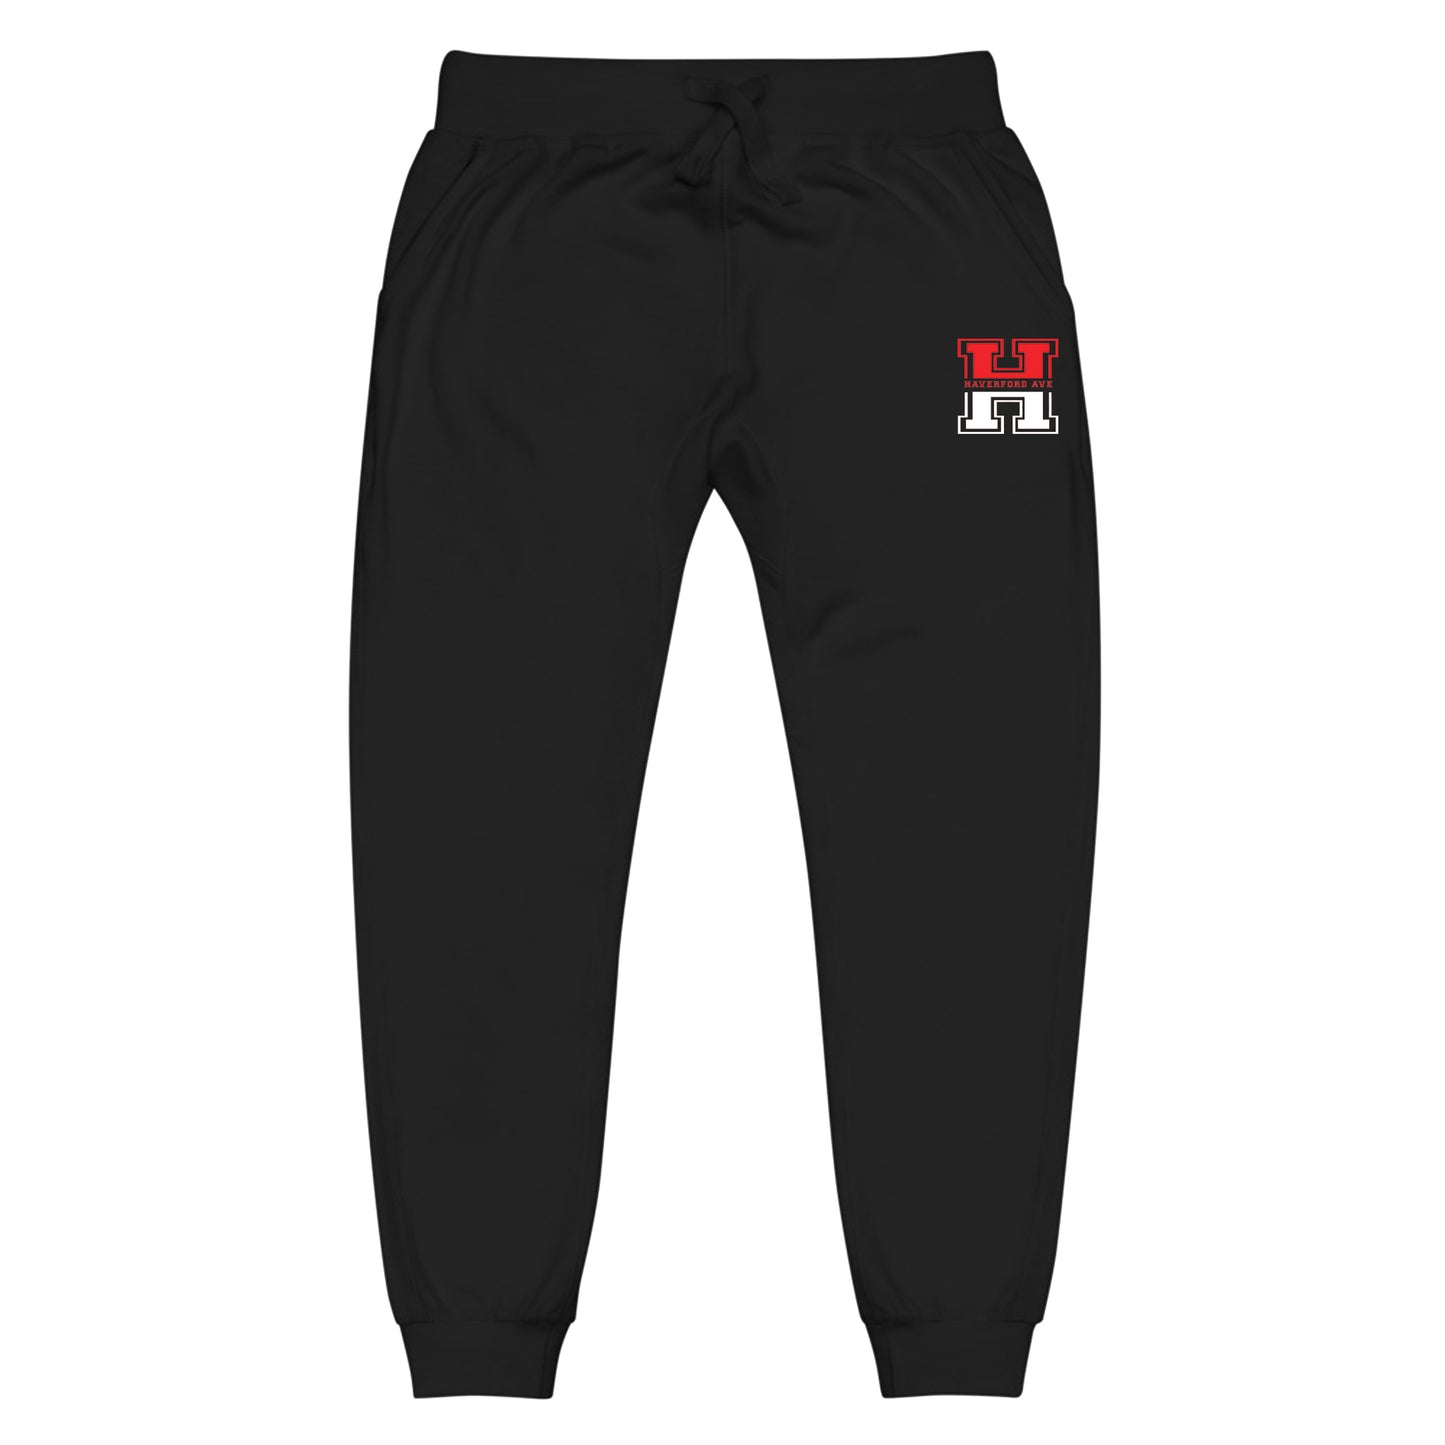 3835 Haverford Ave. Joggers/Sweatpants